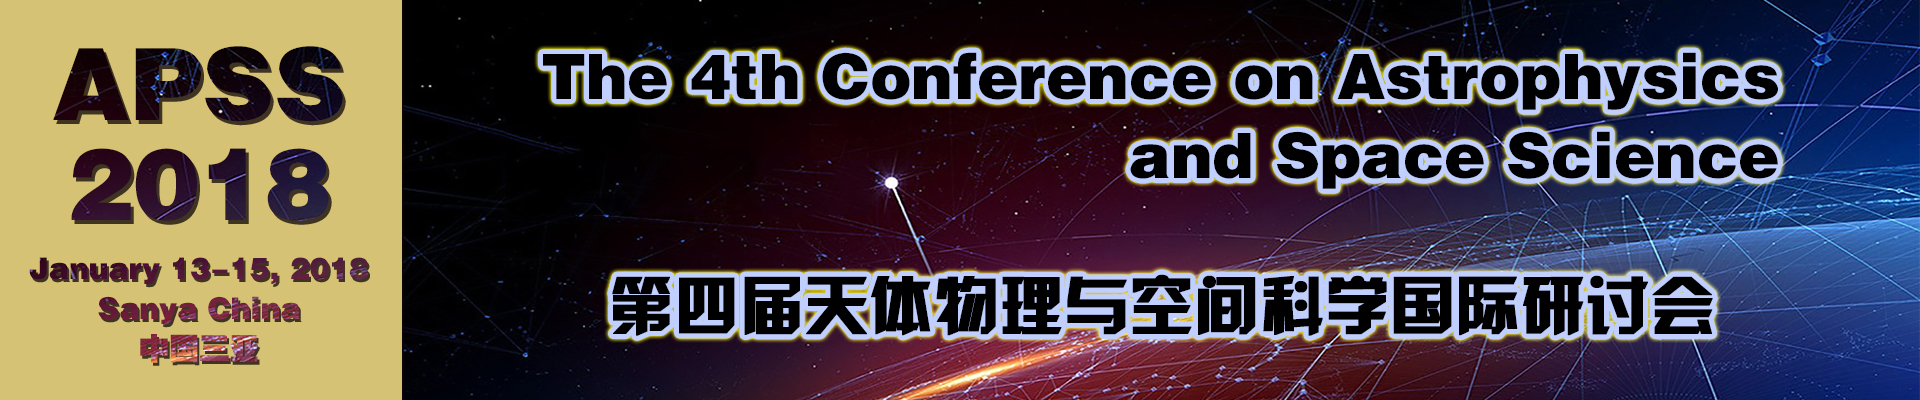 4th Conf. on Astrophysics and Space Science